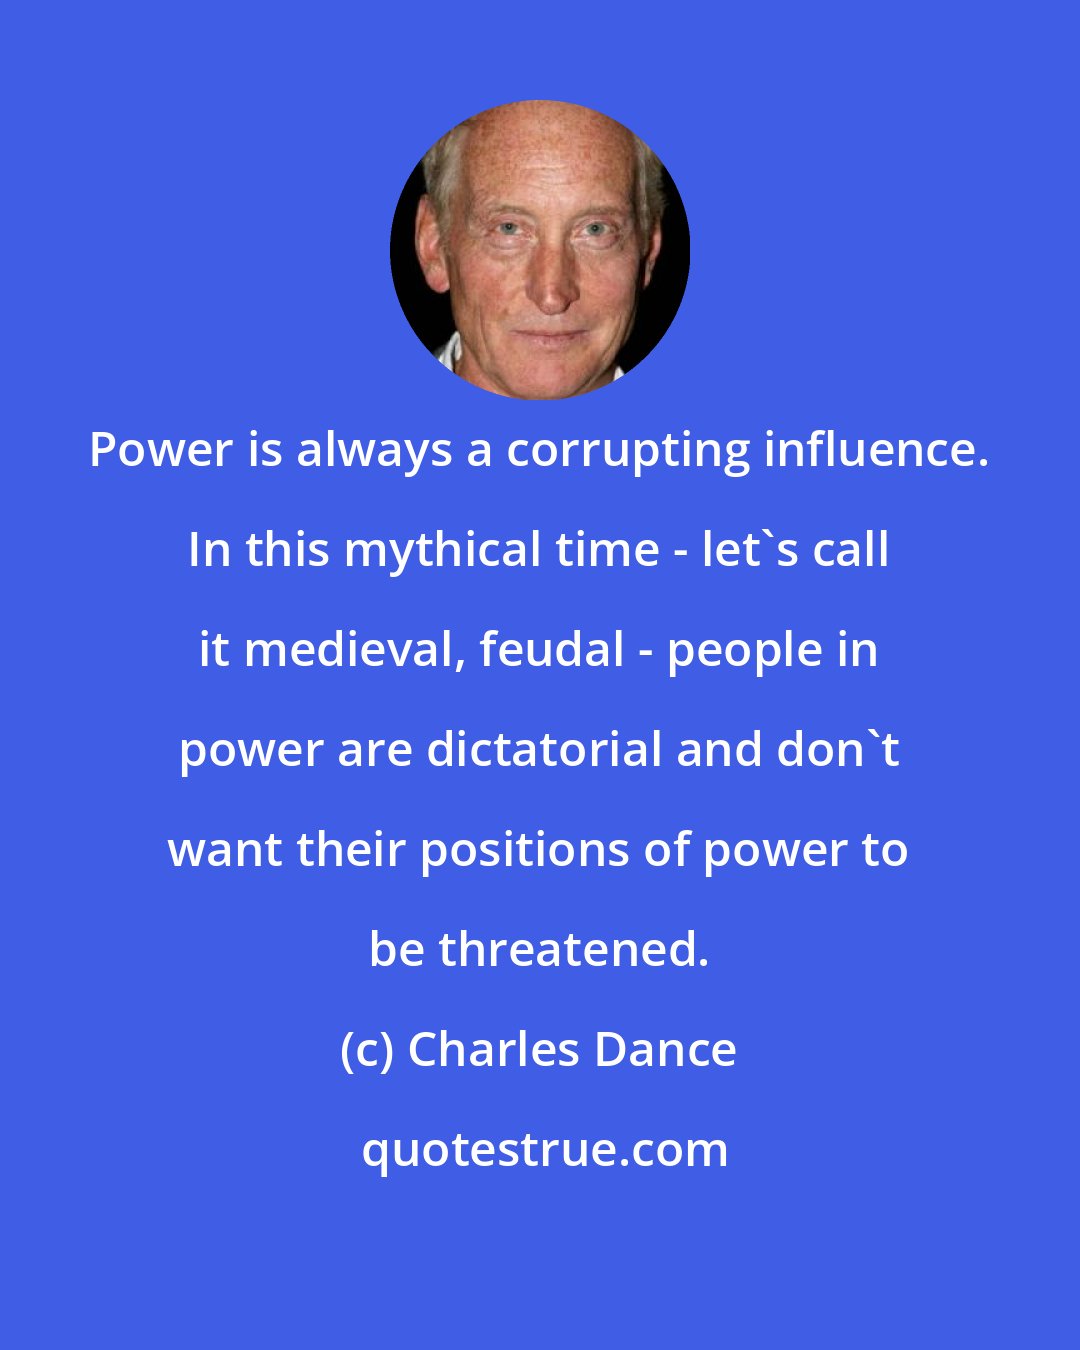 Charles Dance: Power is always a corrupting influence. In this mythical time - let's call it medieval, feudal - people in power are dictatorial and don't want their positions of power to be threatened.